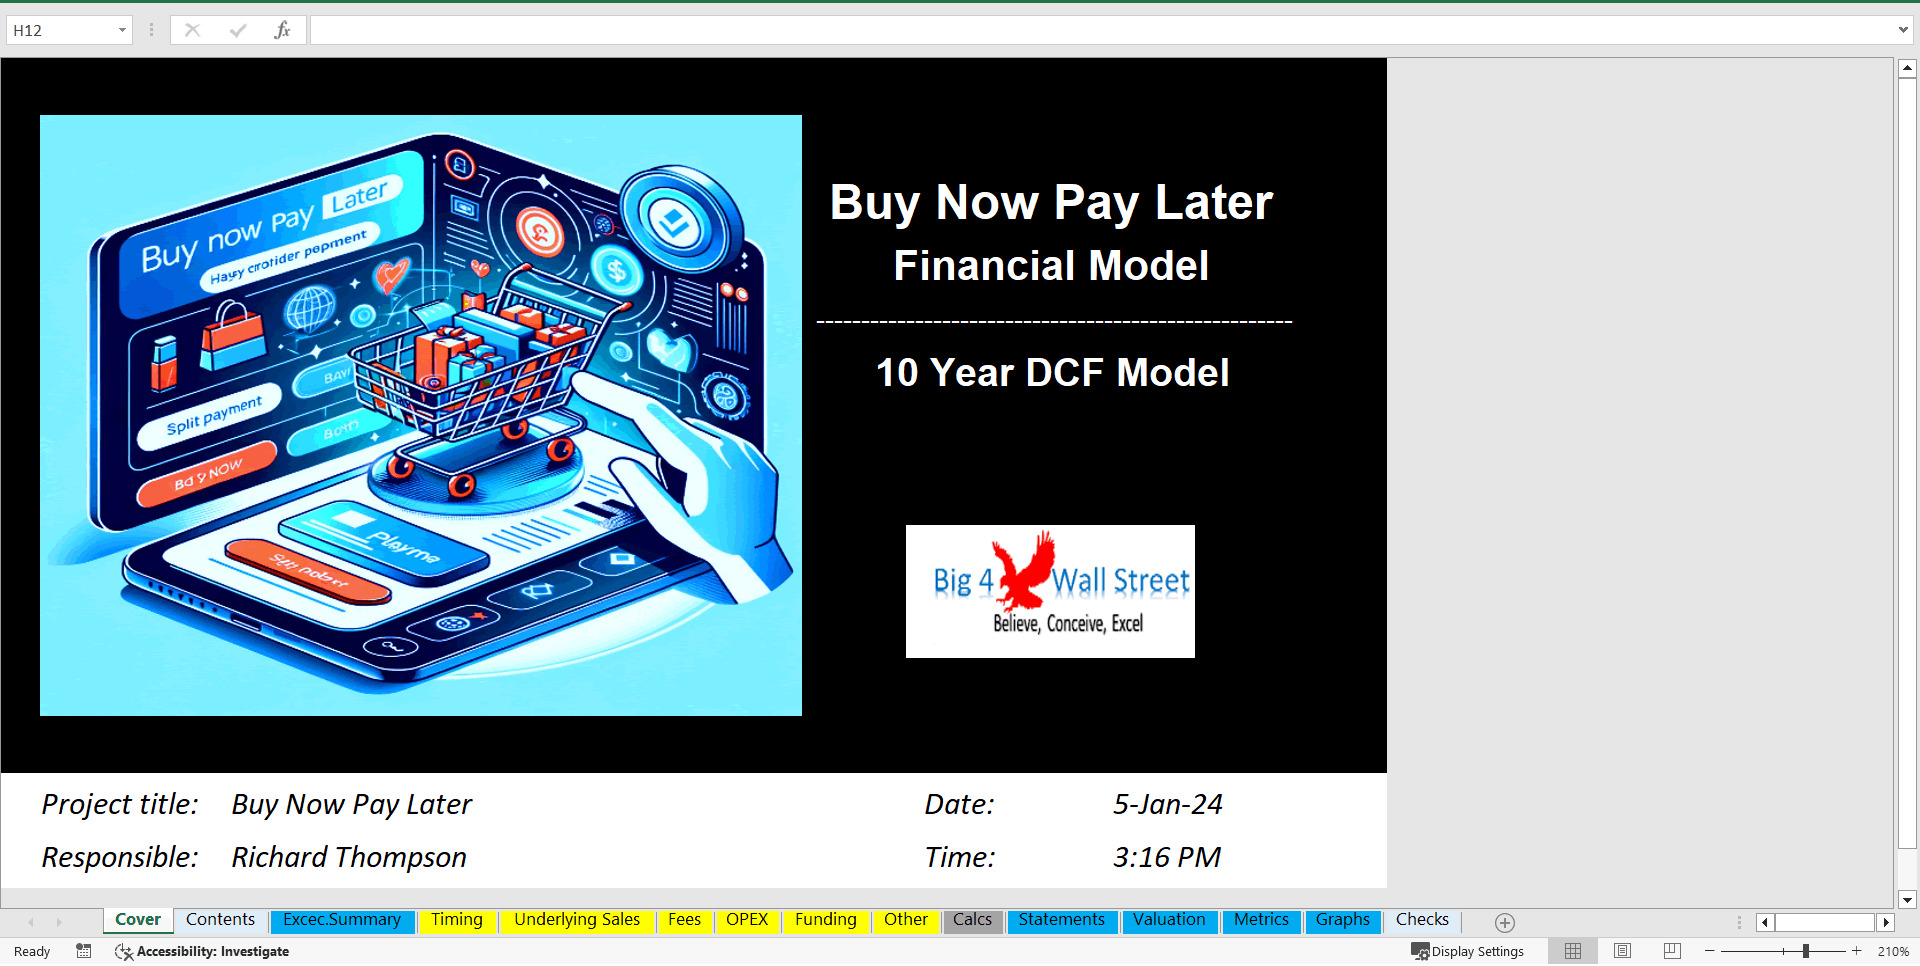 Buy Now Pay Later DCF Model & Valuation (10 Year DCF Model)